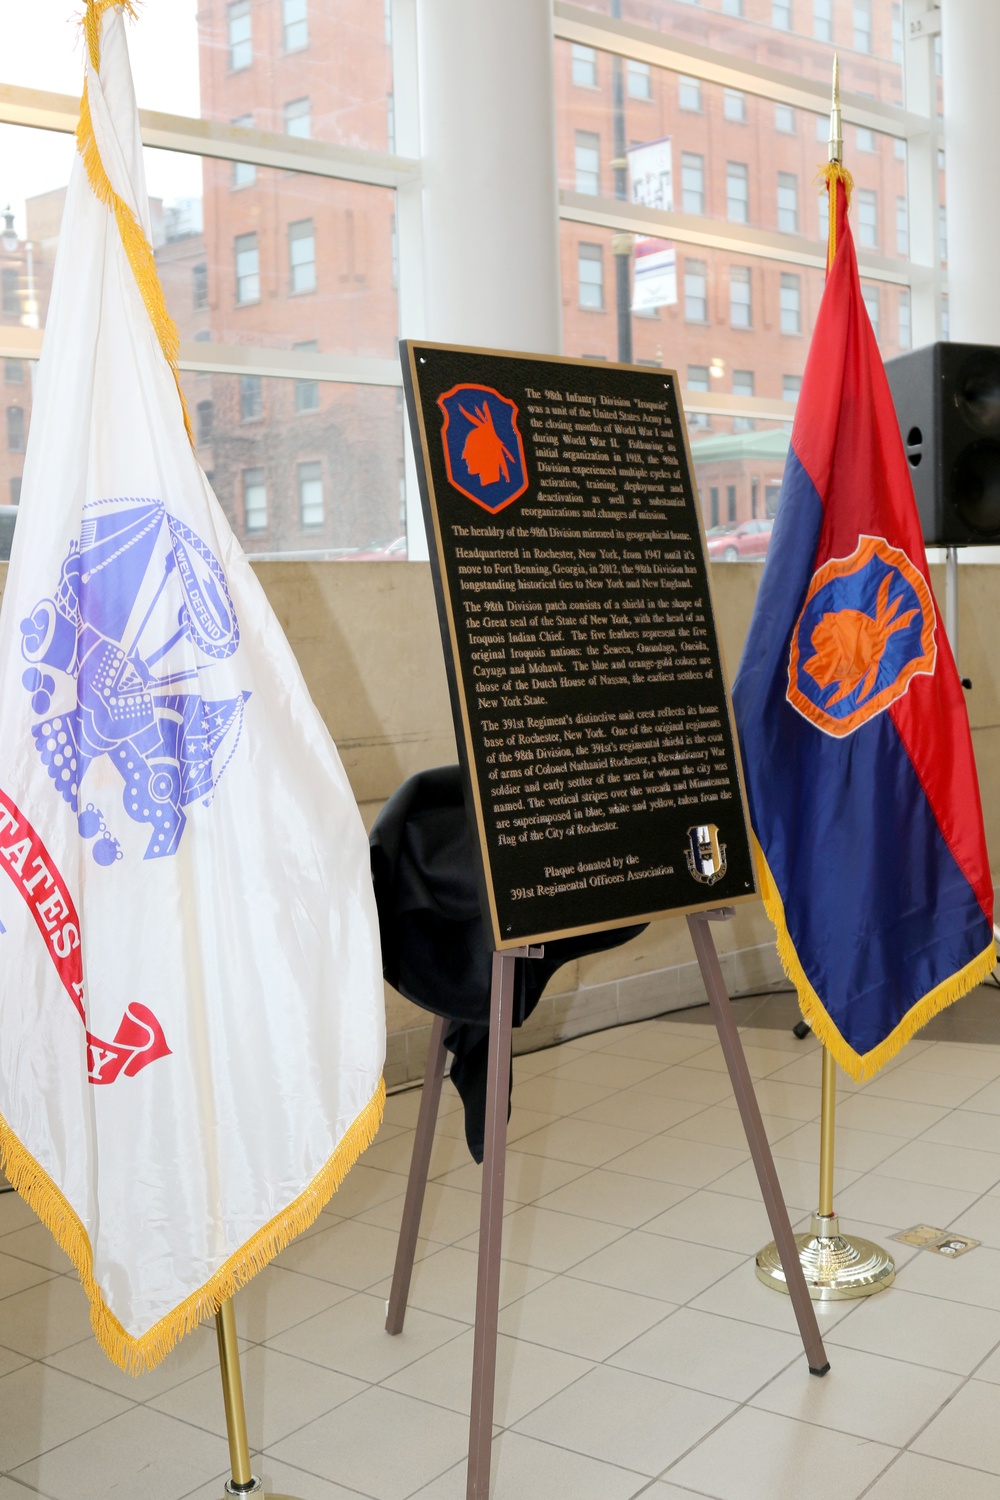 Bronze plaque honors 98th Training Division in New York